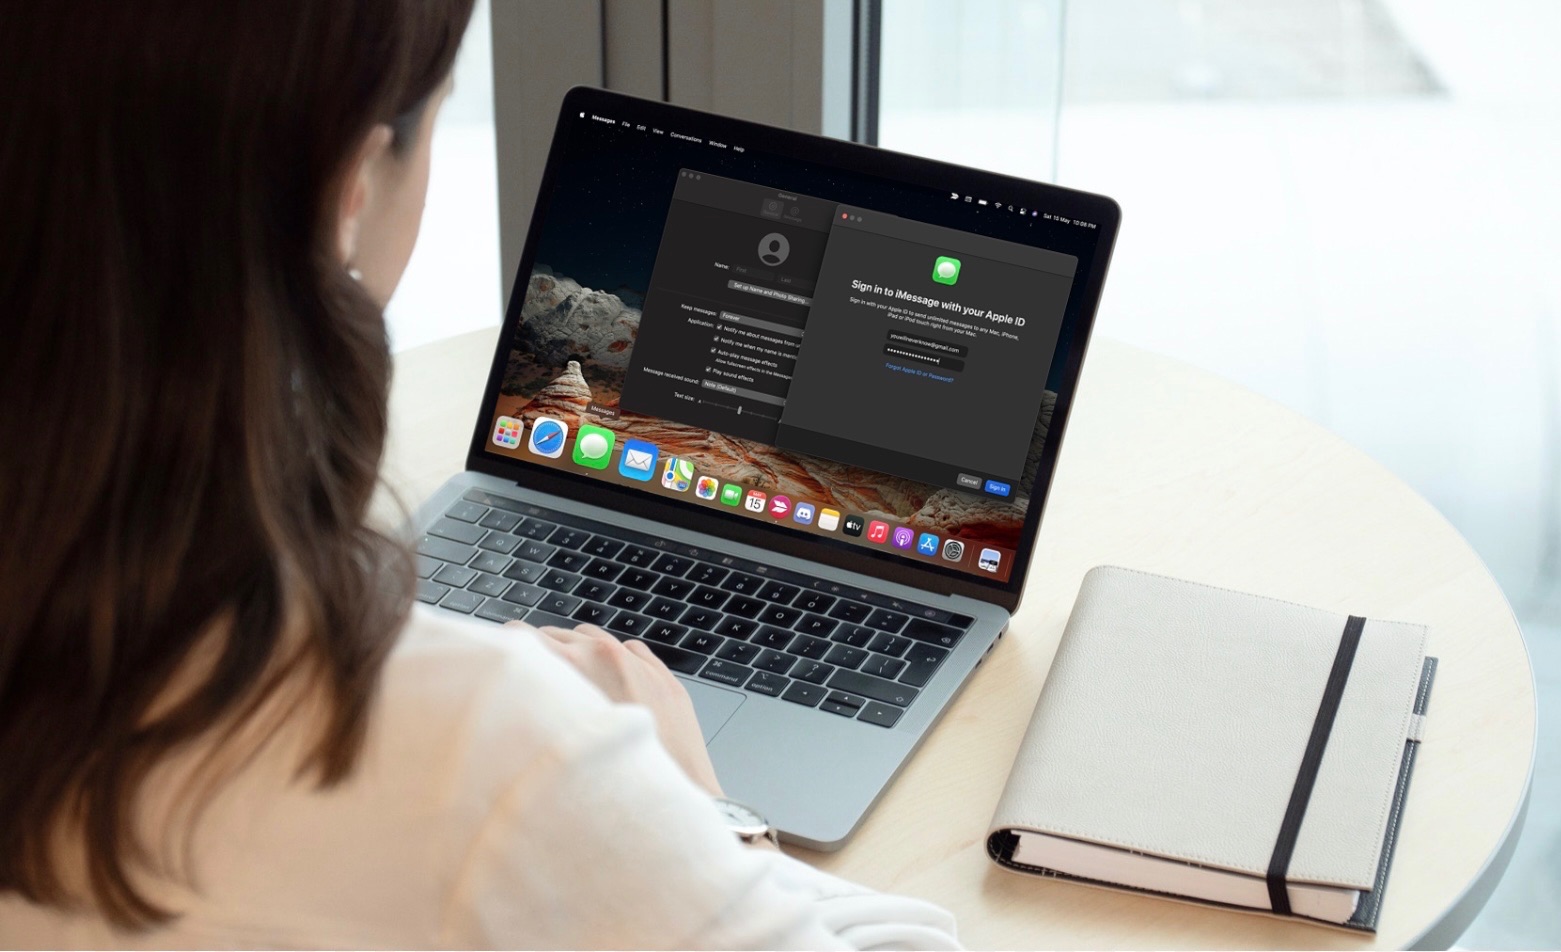 How To Select Multiple Conversations On Mac To Delete 1